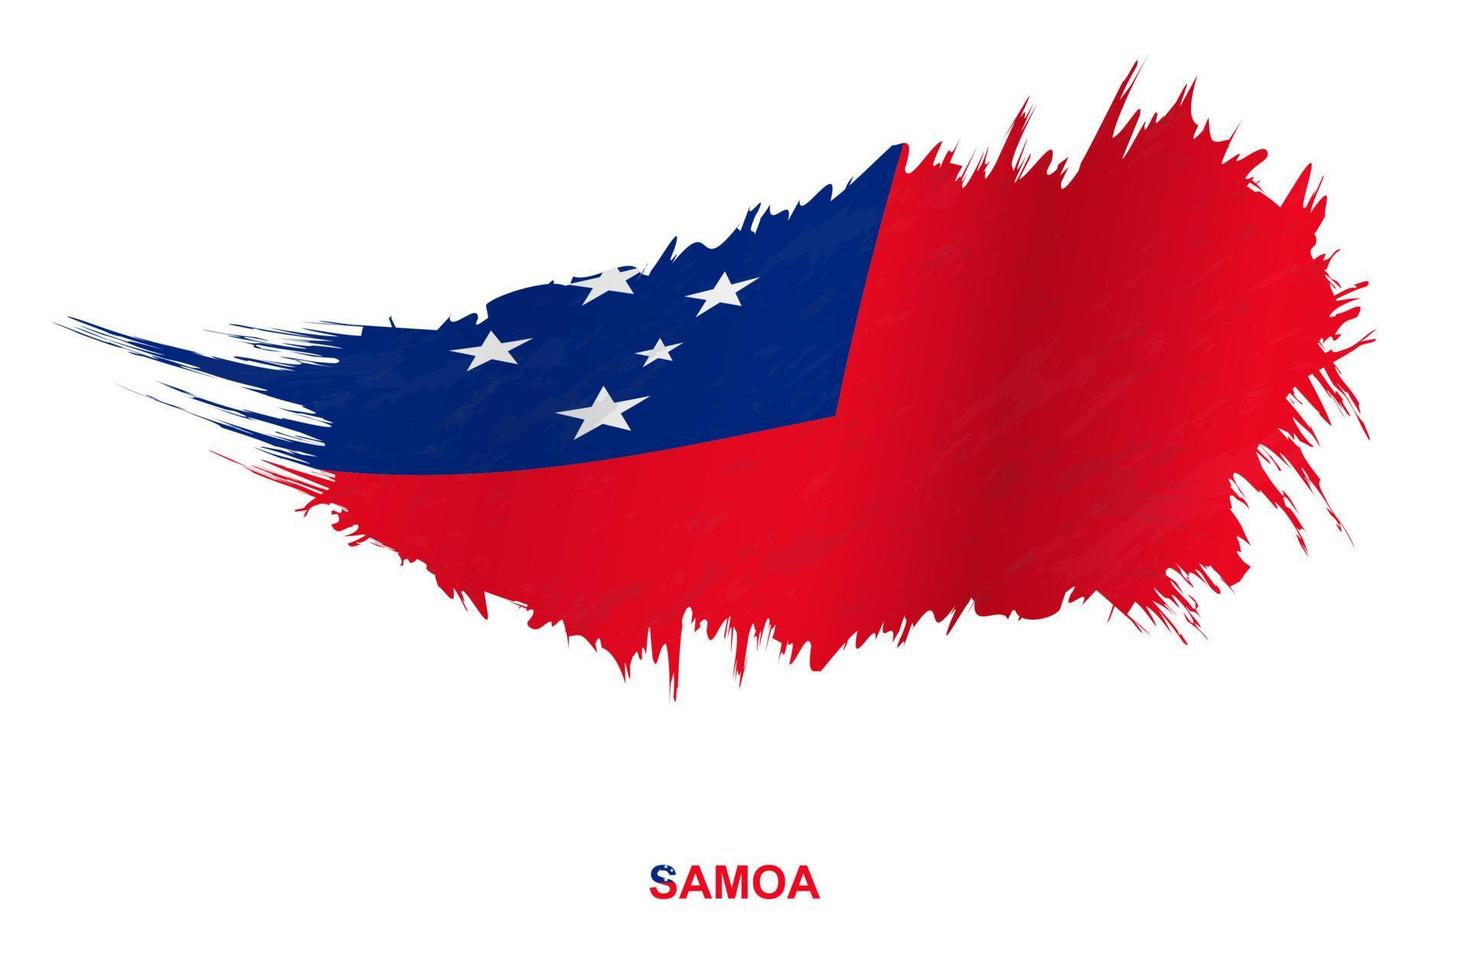 Flag of Samoa in grunge style with waving effect. vector